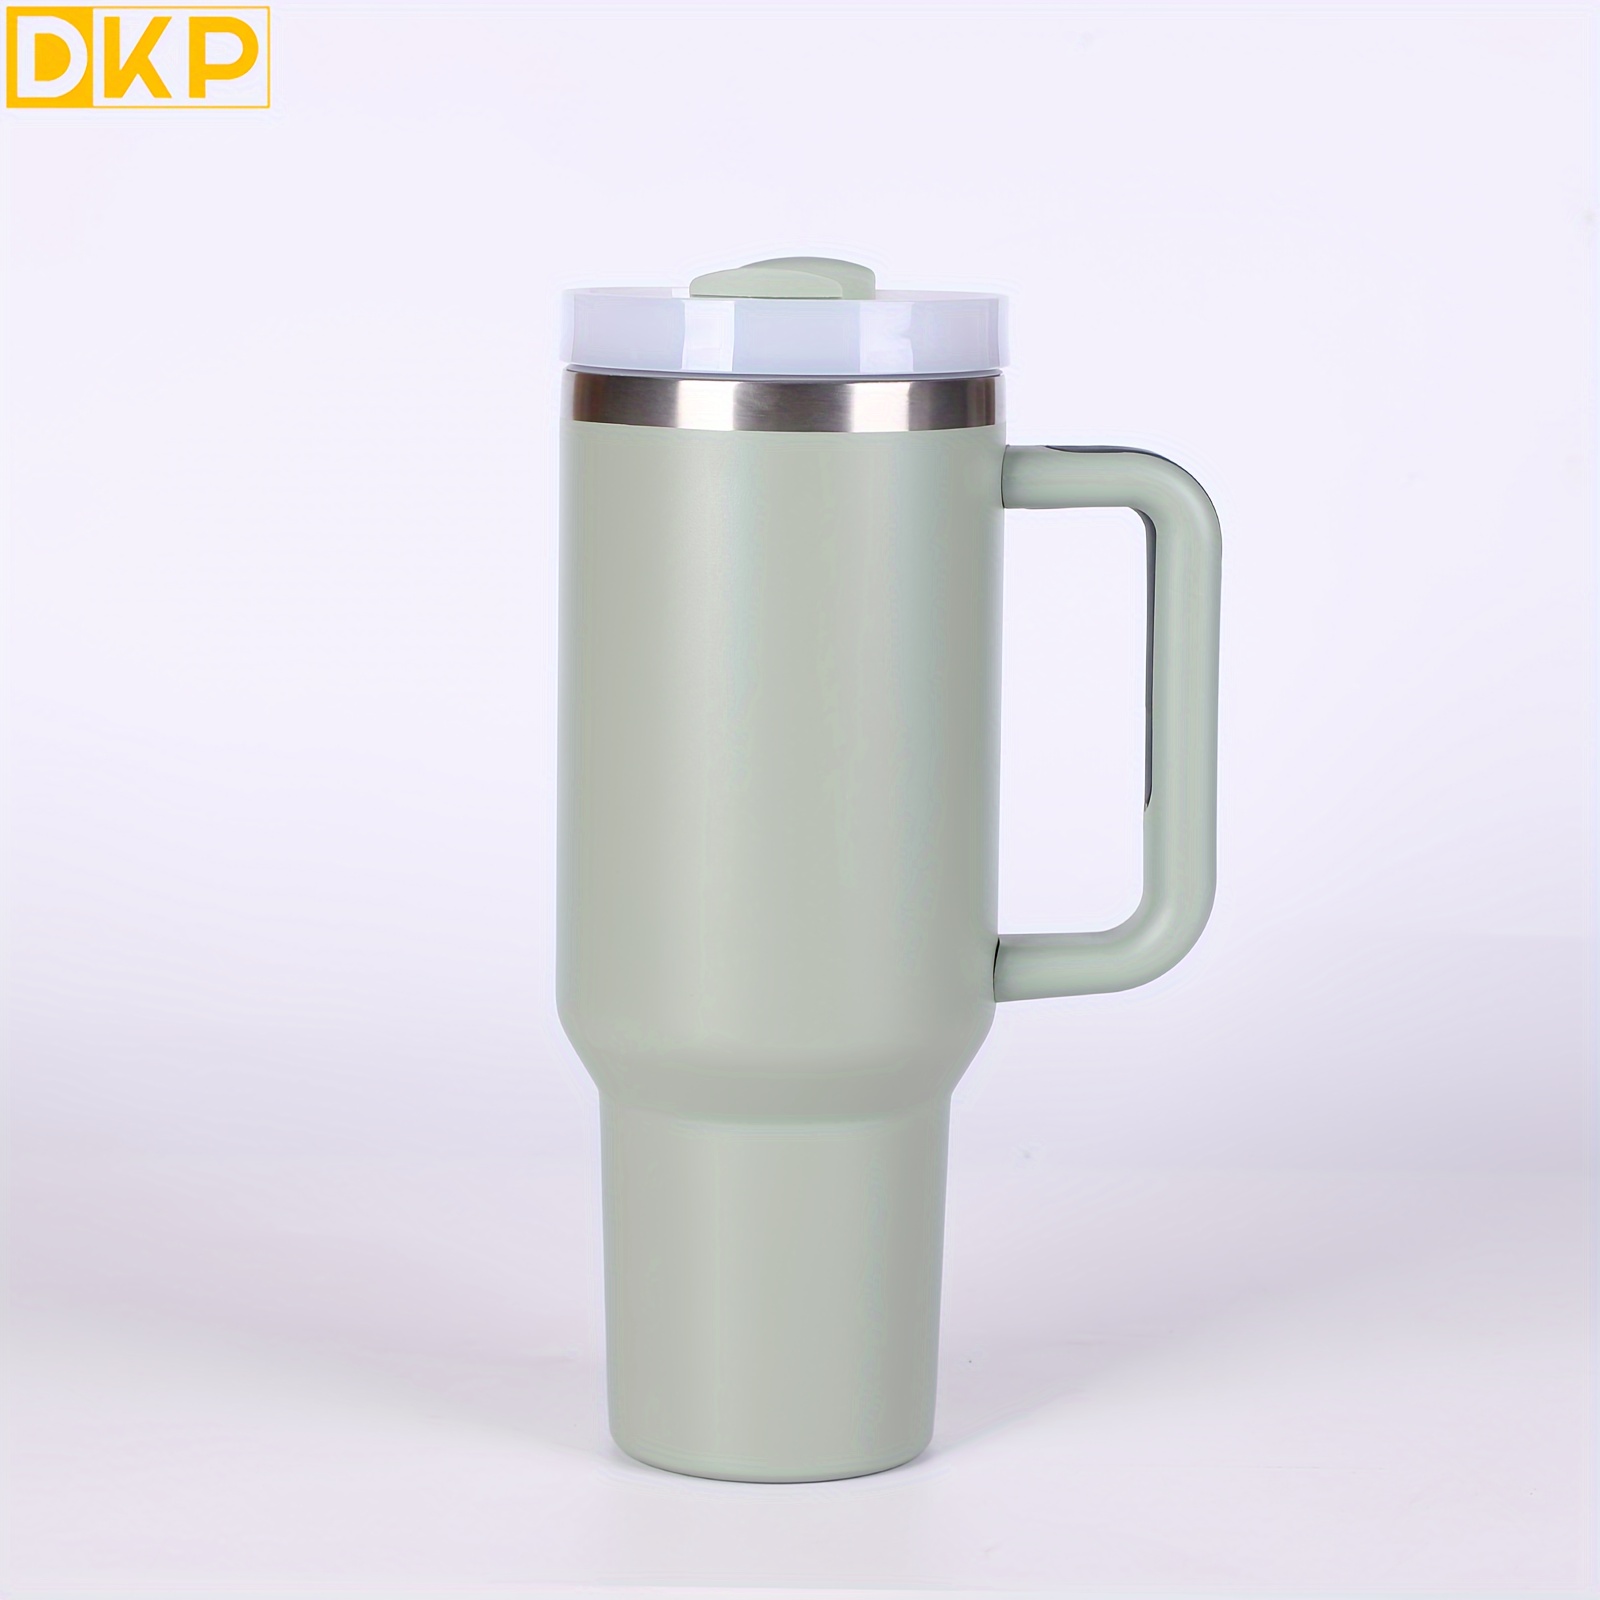 Stanley 30oz/40oz Stainless Steel Tumbler Insulated Water Bottle with Handle  Lid Straw Large Capacity Vacuum Travel Mug Outdoor - AliExpress